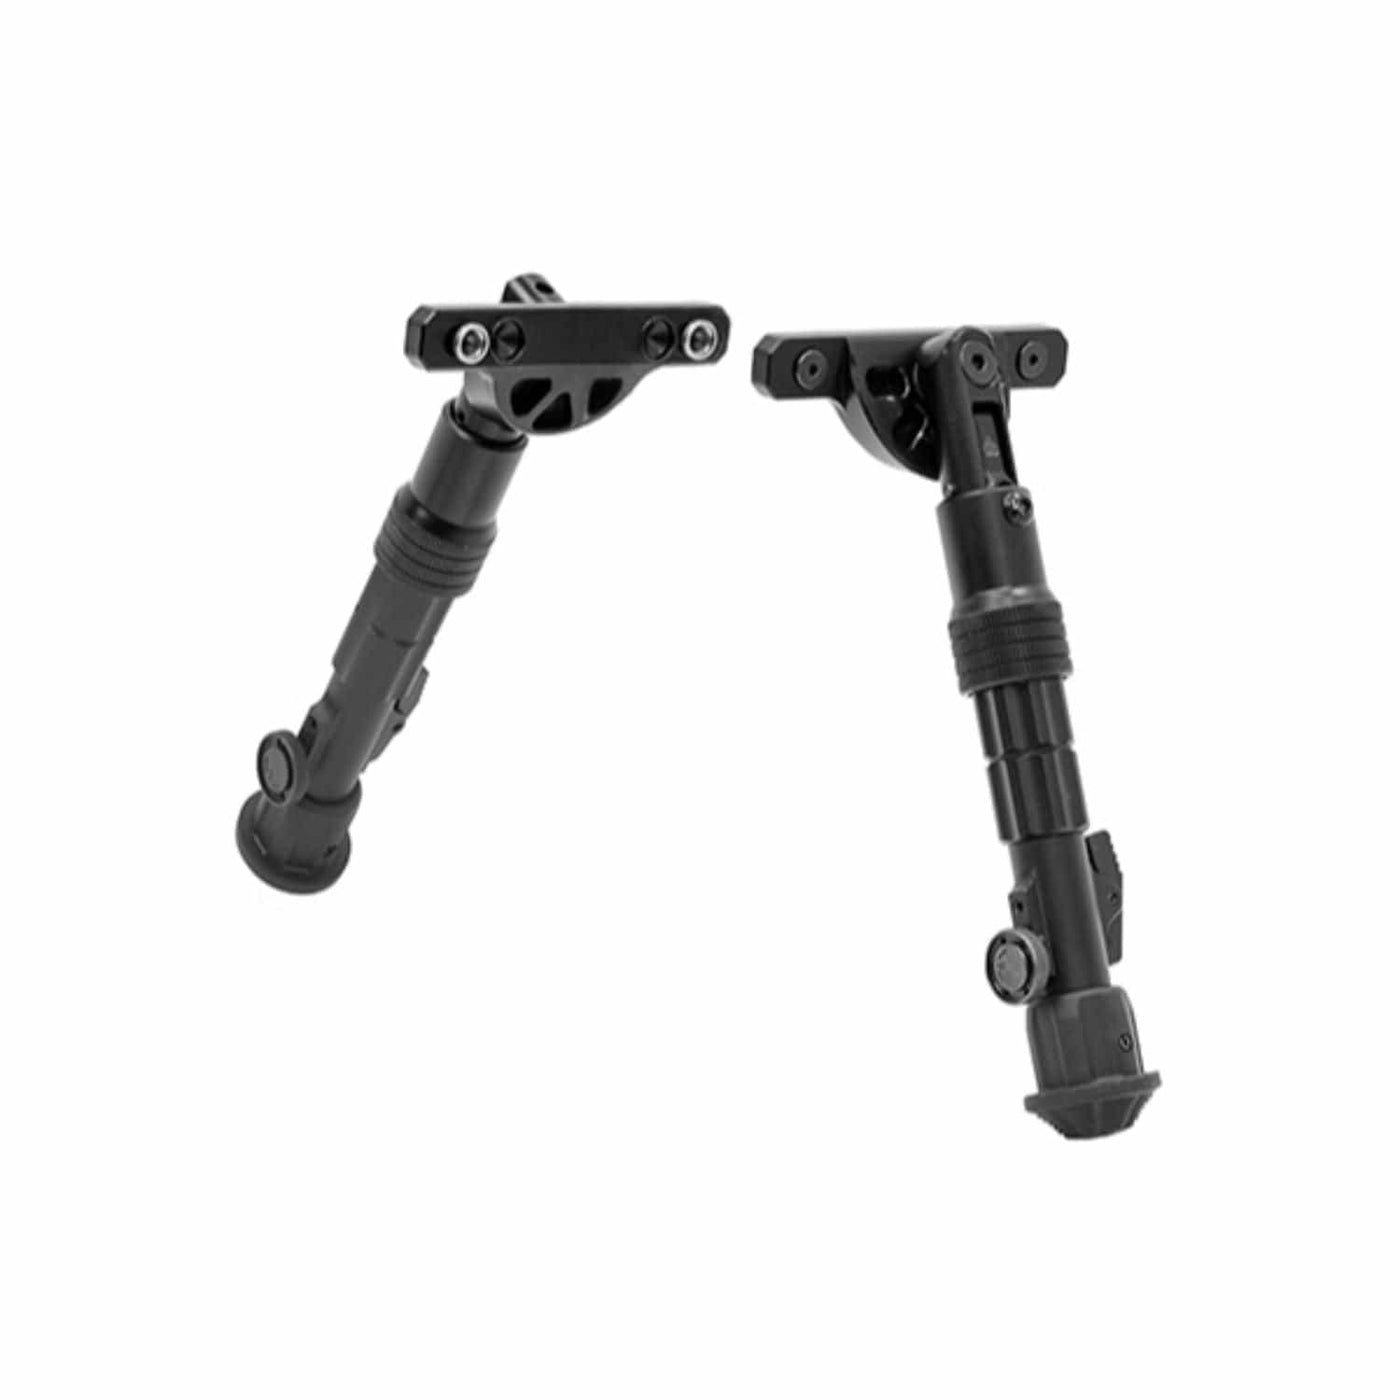 Leapers Leapers UTG Recon Flex Keymod Bipod Center Height 5.7-8in Shooting